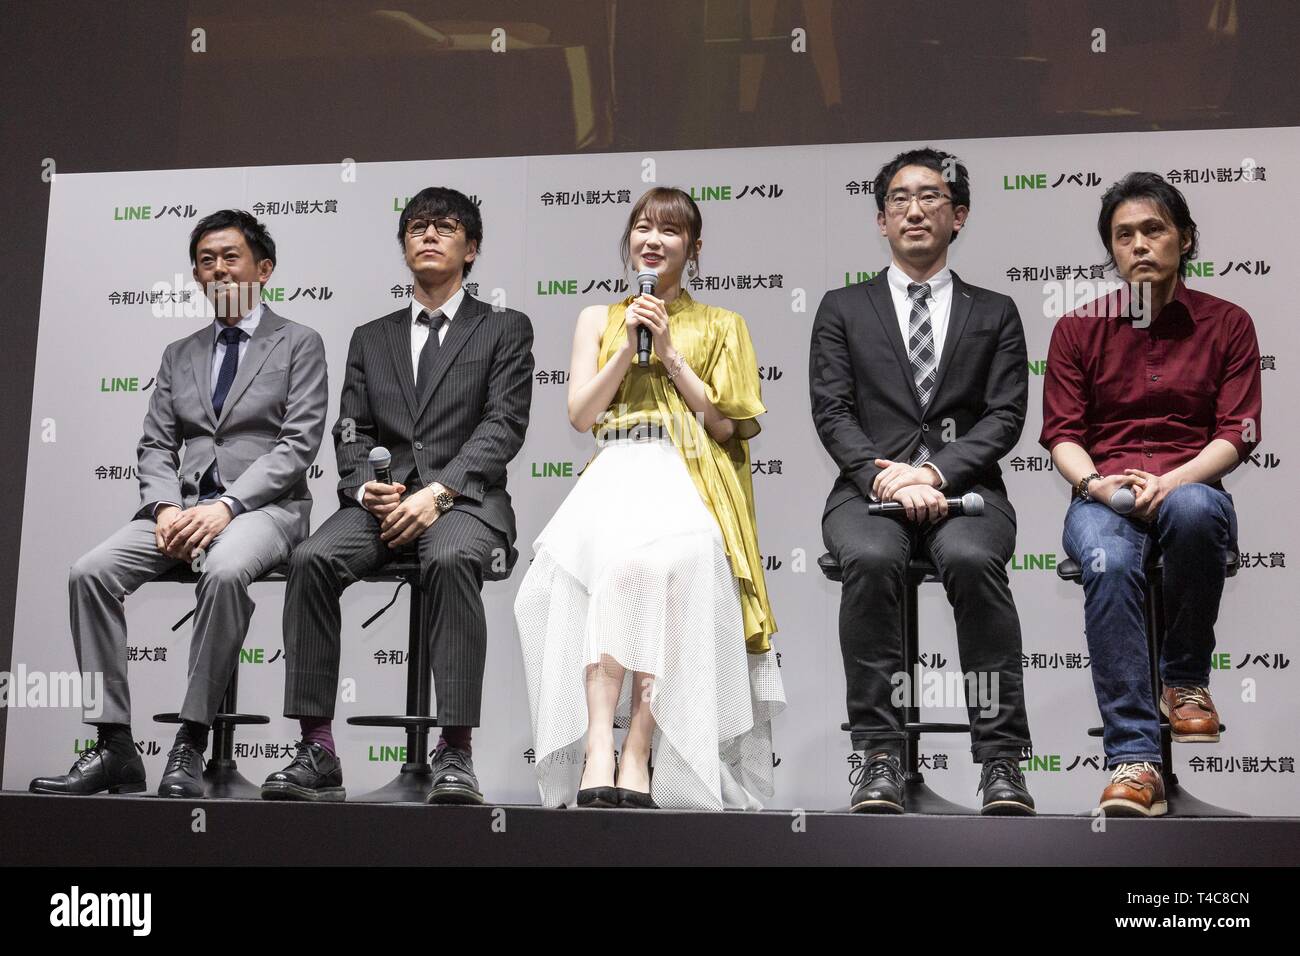 Tokyo, Japan. 16th Apr, 2019. (L to R) Hiroshi Mori Executive Officer of LINE Corp., Yuma Takahashi producer of Aniplex, Japanese idol Kazumi Takayama, Hiroyuki Ueno Producer of Nippon Television Network Corp. and Kazuma Miki CEO of Straight Edge Inc., speak during a news conference to announce a new service Line Novel and the Reiwa Novel Award which aims users to participate on its first novel contest sending their creations through their app from April 16 to September 30. Credit: Rodrigo Reyes Marin/ZUMA Wire/Alamy Live News Stock Photo